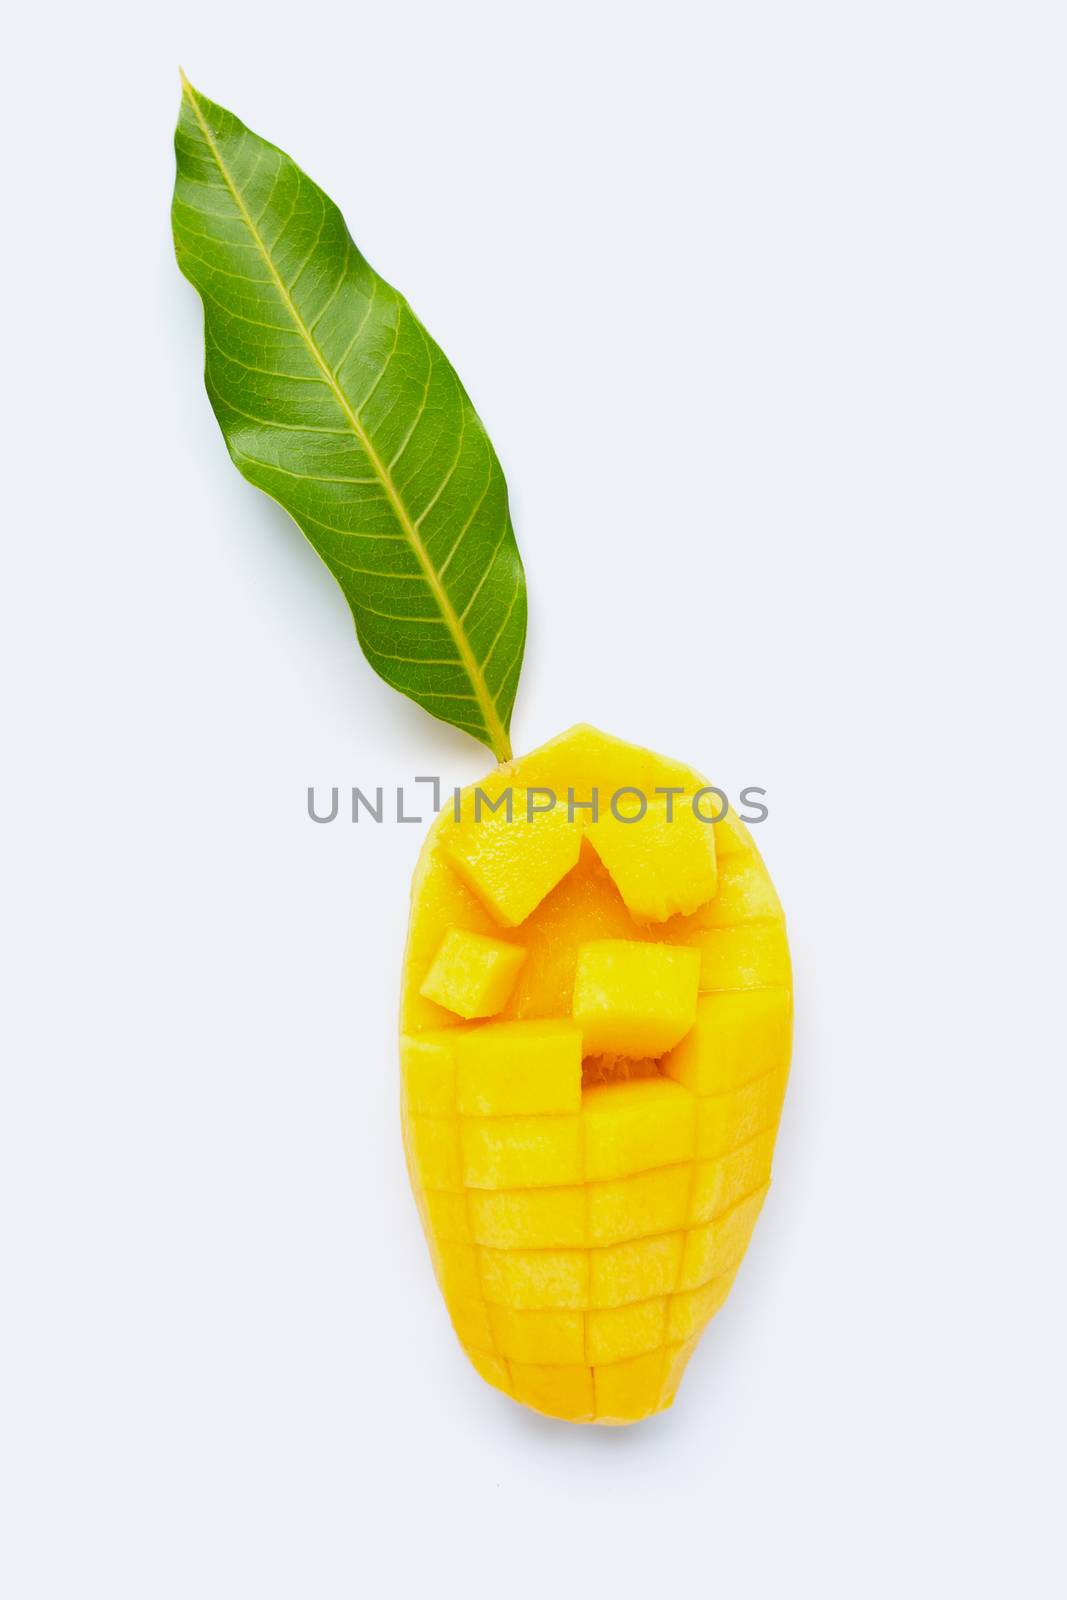 Tropical fruit, Mango  on white background. Top view